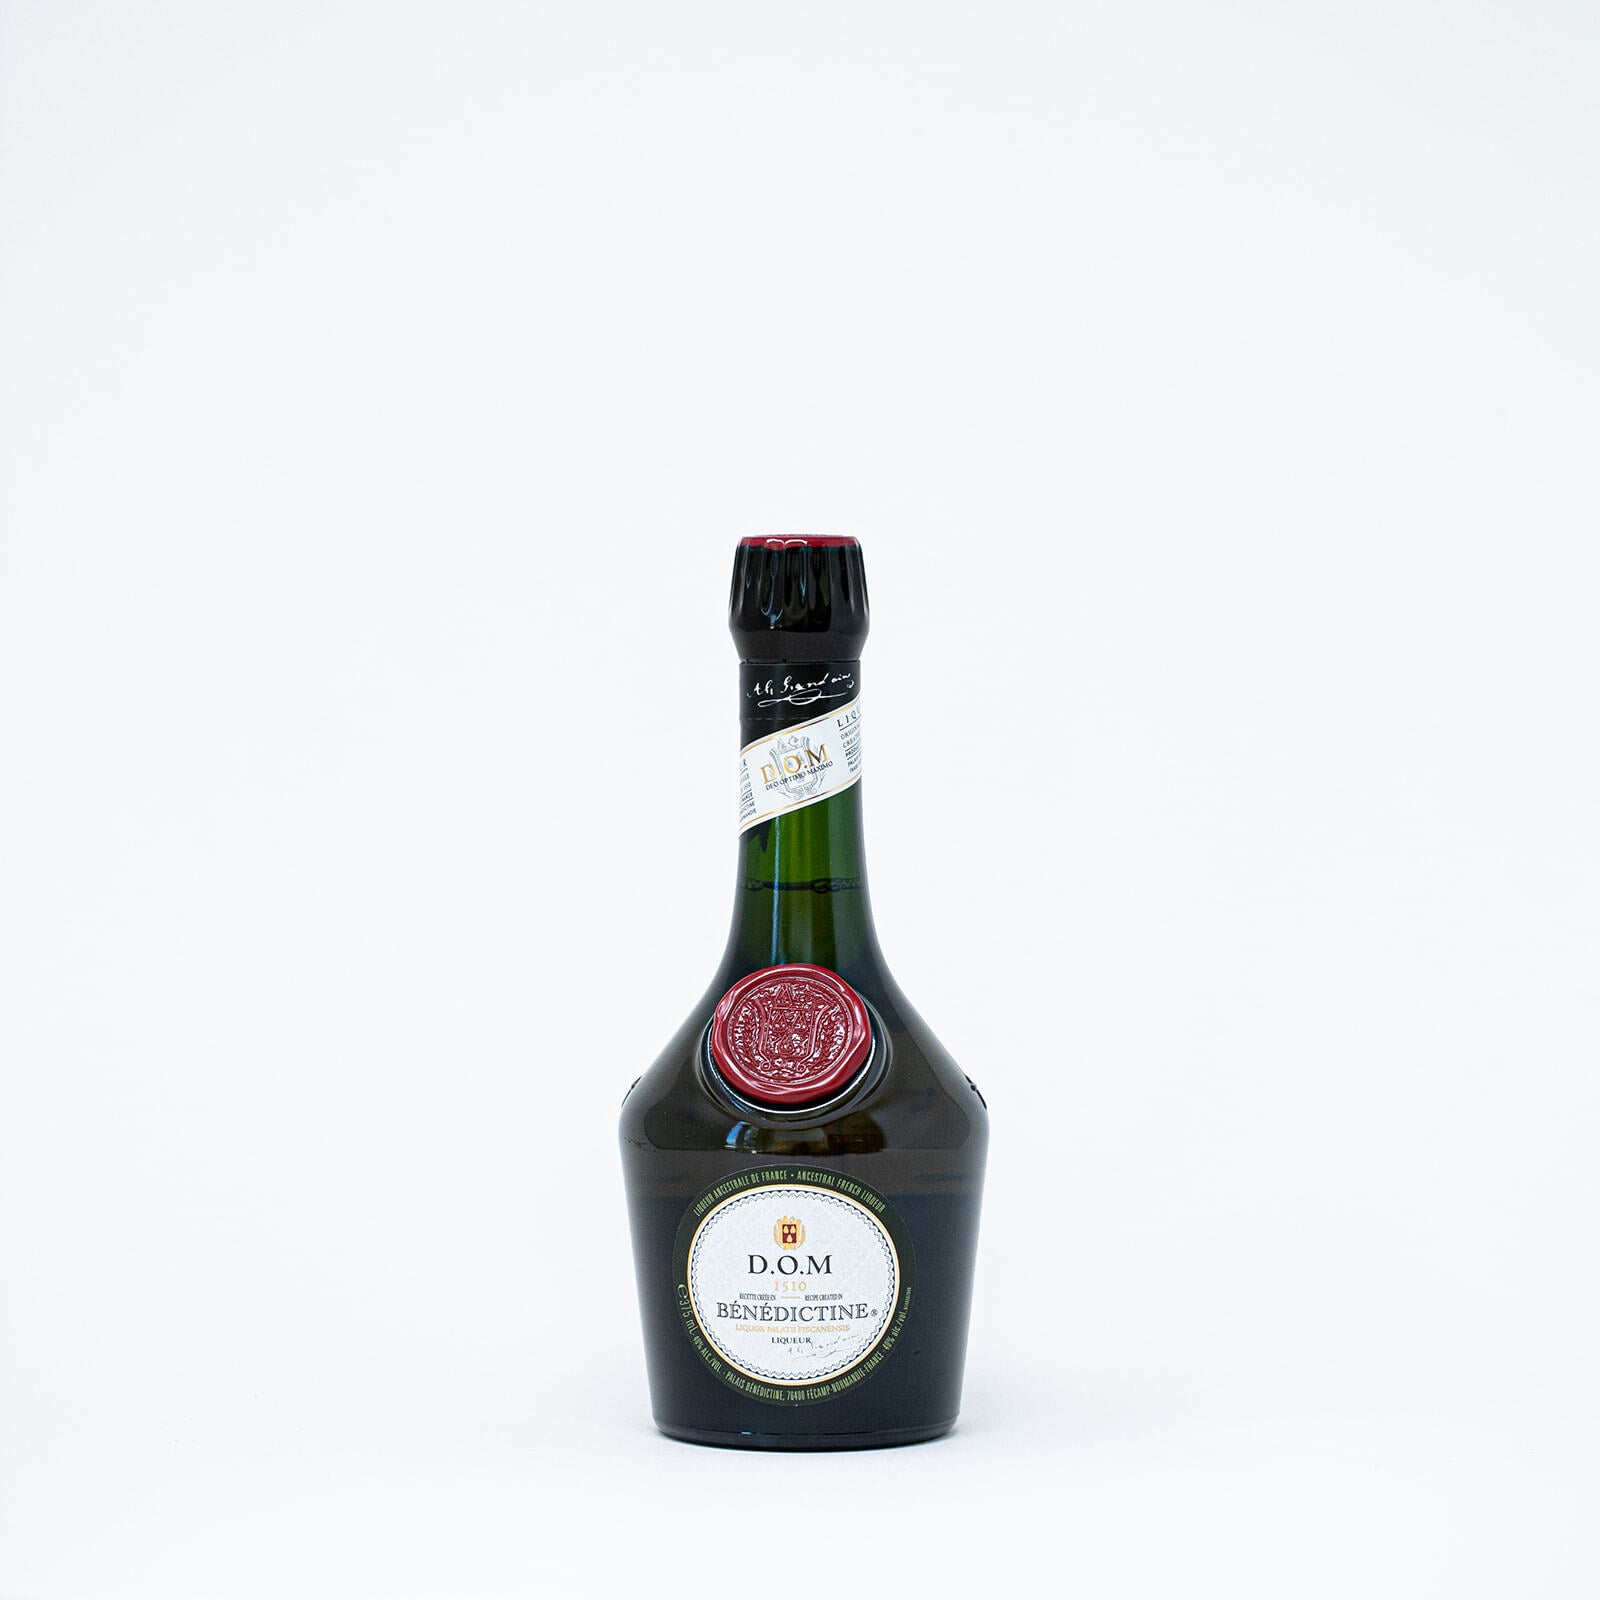 BENEDICTINE LIQUEUR 375ML 40% ABV | #gethilo On-Demand Delivery or Curbside  Pickup in LA, LBC, and Costa Mesa!